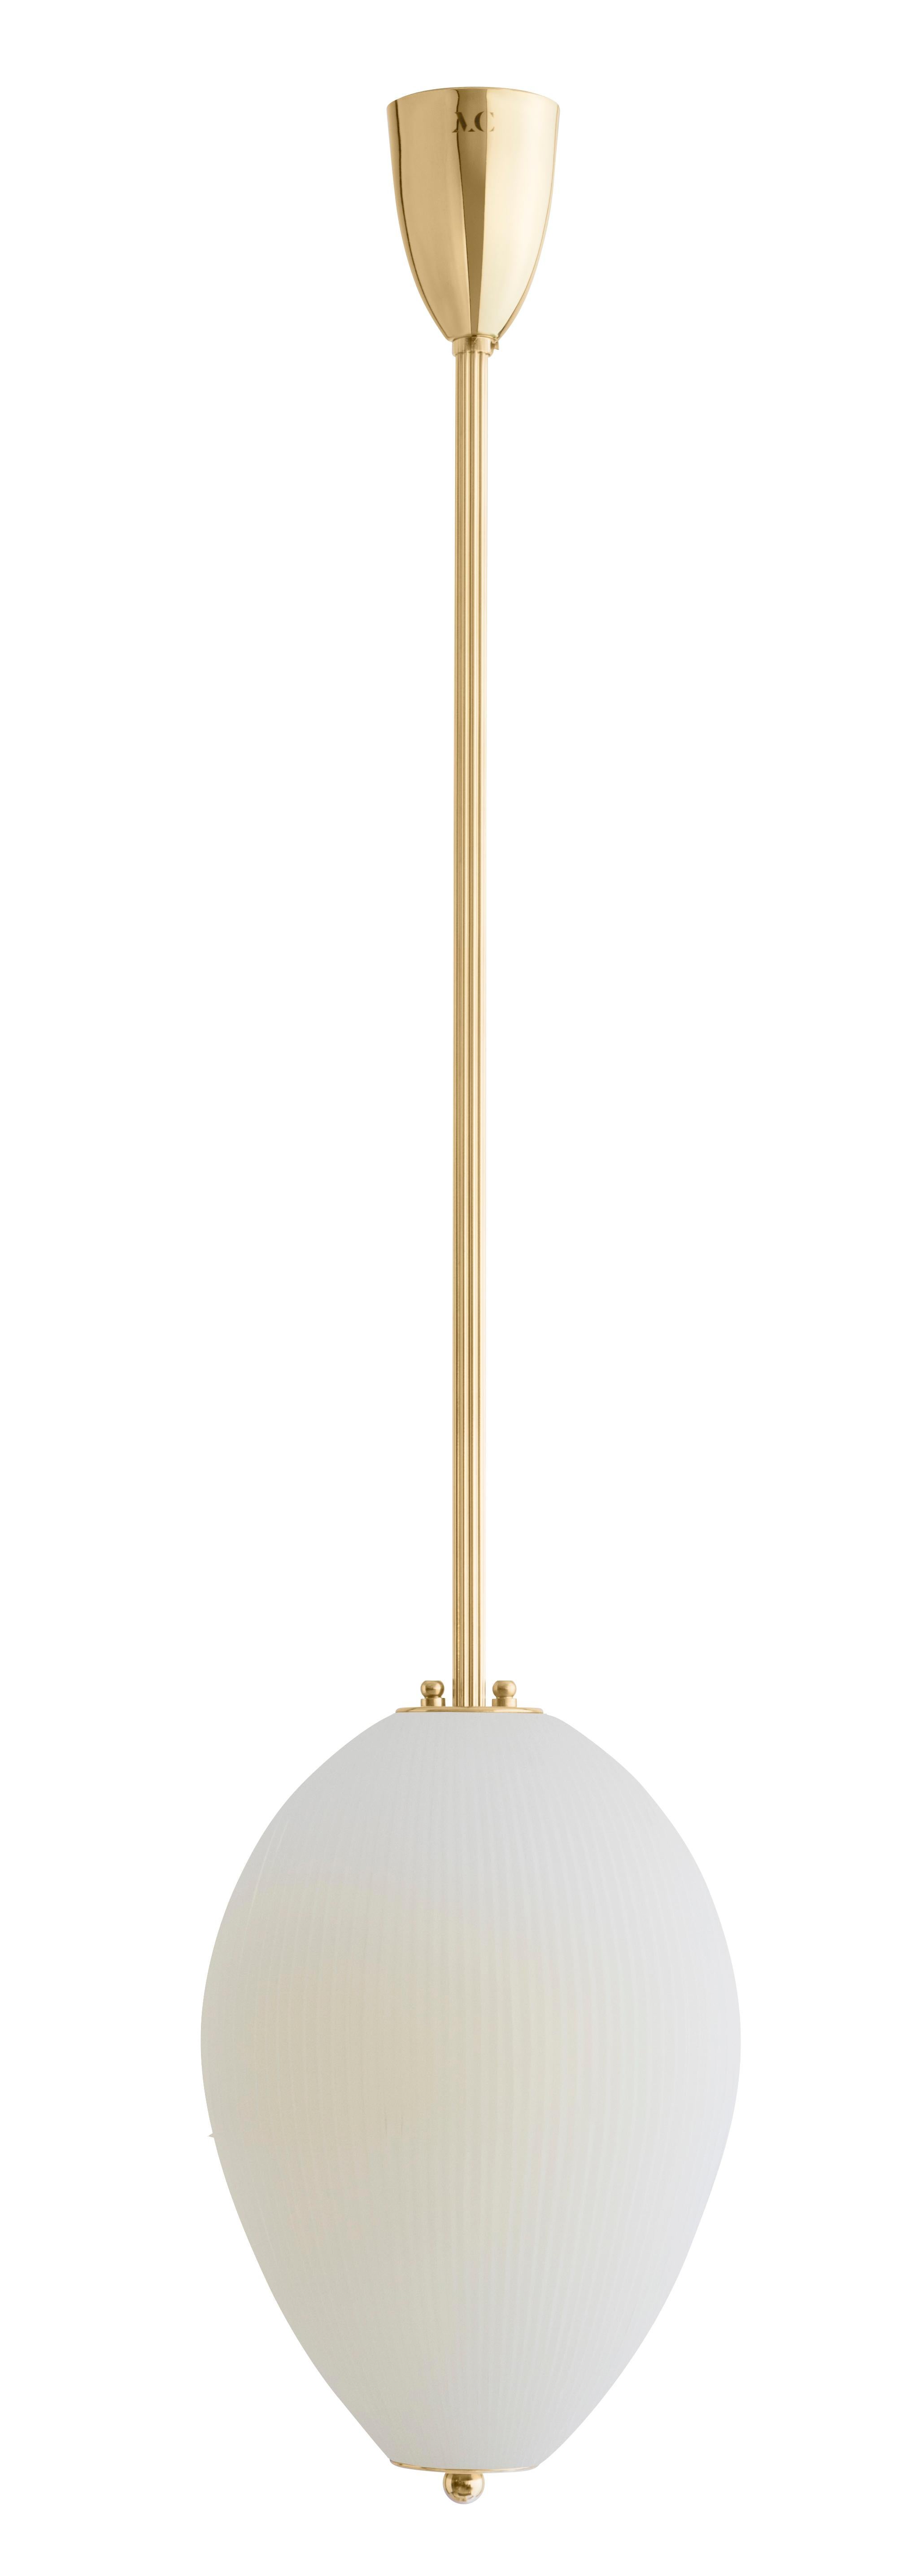 Pendant China 10 by Magic Circus Editions.
Dimensions: H 90 x W 32 x D 32 cm, also available in H 110, 130, 150, 175, 190 cm.
Materials: brass, mouth blown glass sculpted with a diamond saw.
Colour: ivory.

Available finishes: brass,